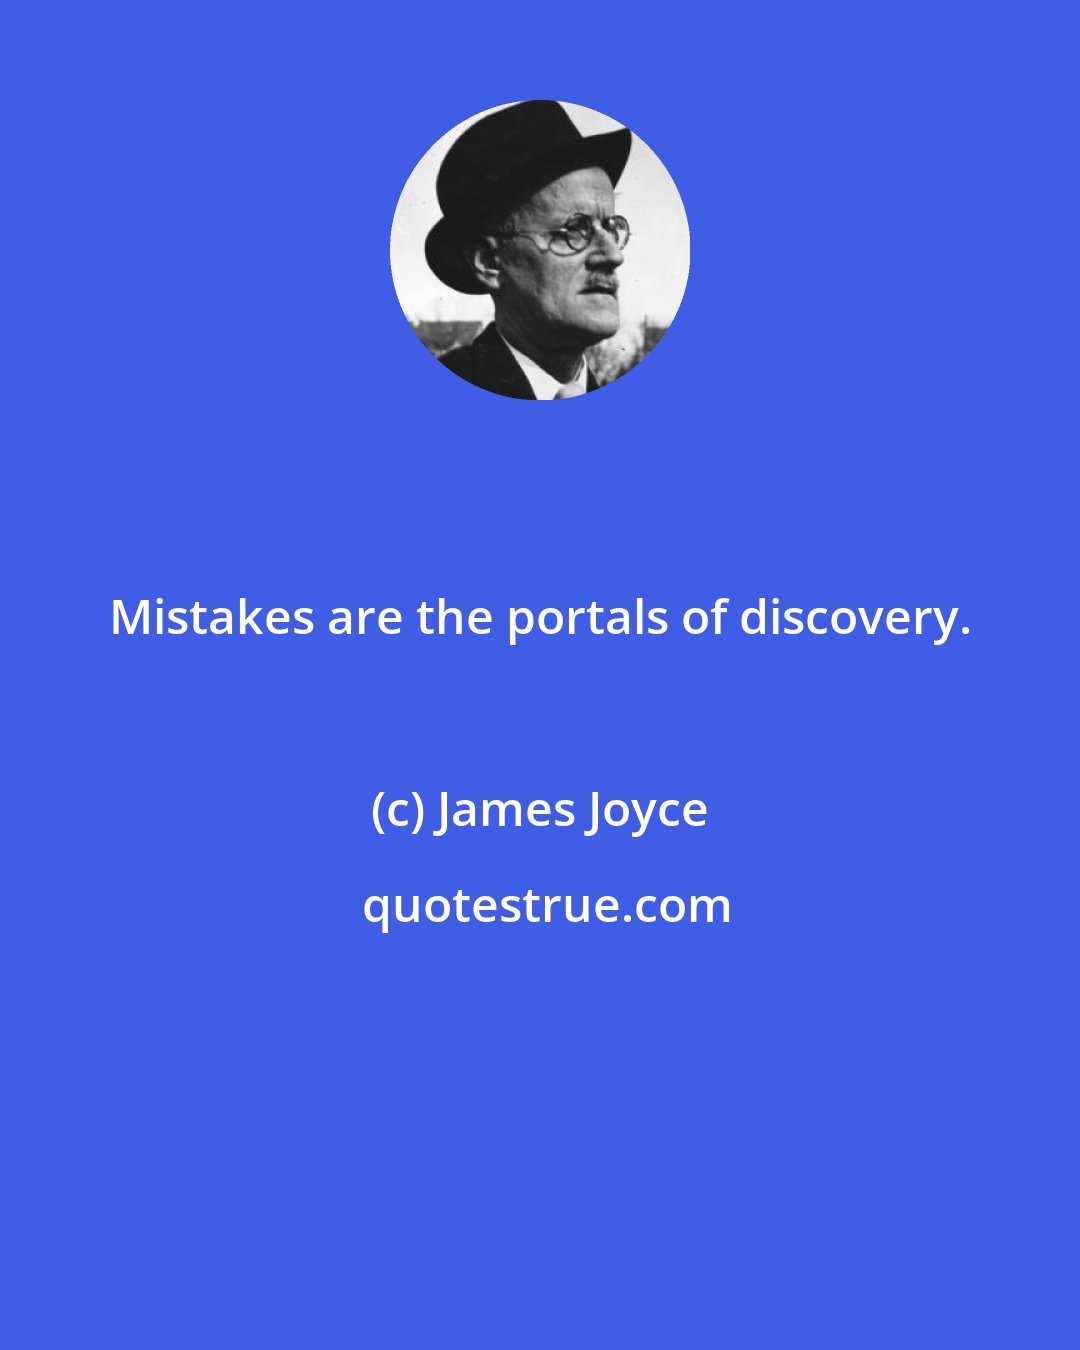 James Joyce: Mistakes are the portals of discovery.